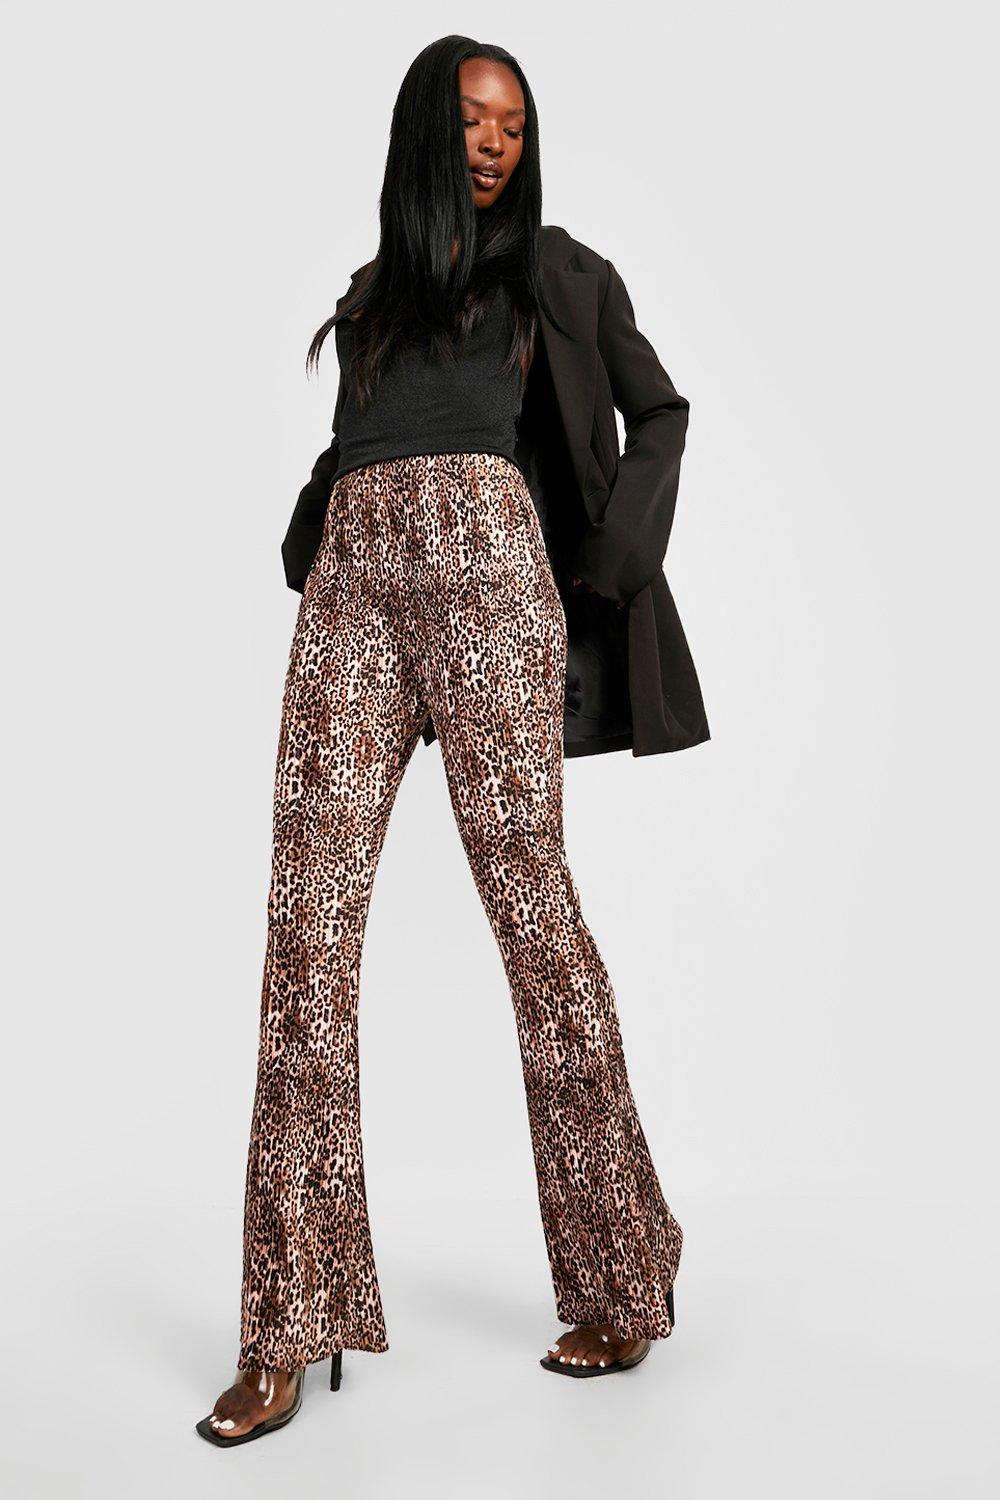 Jogger Pants for a Holiday Party? - Economy of Style